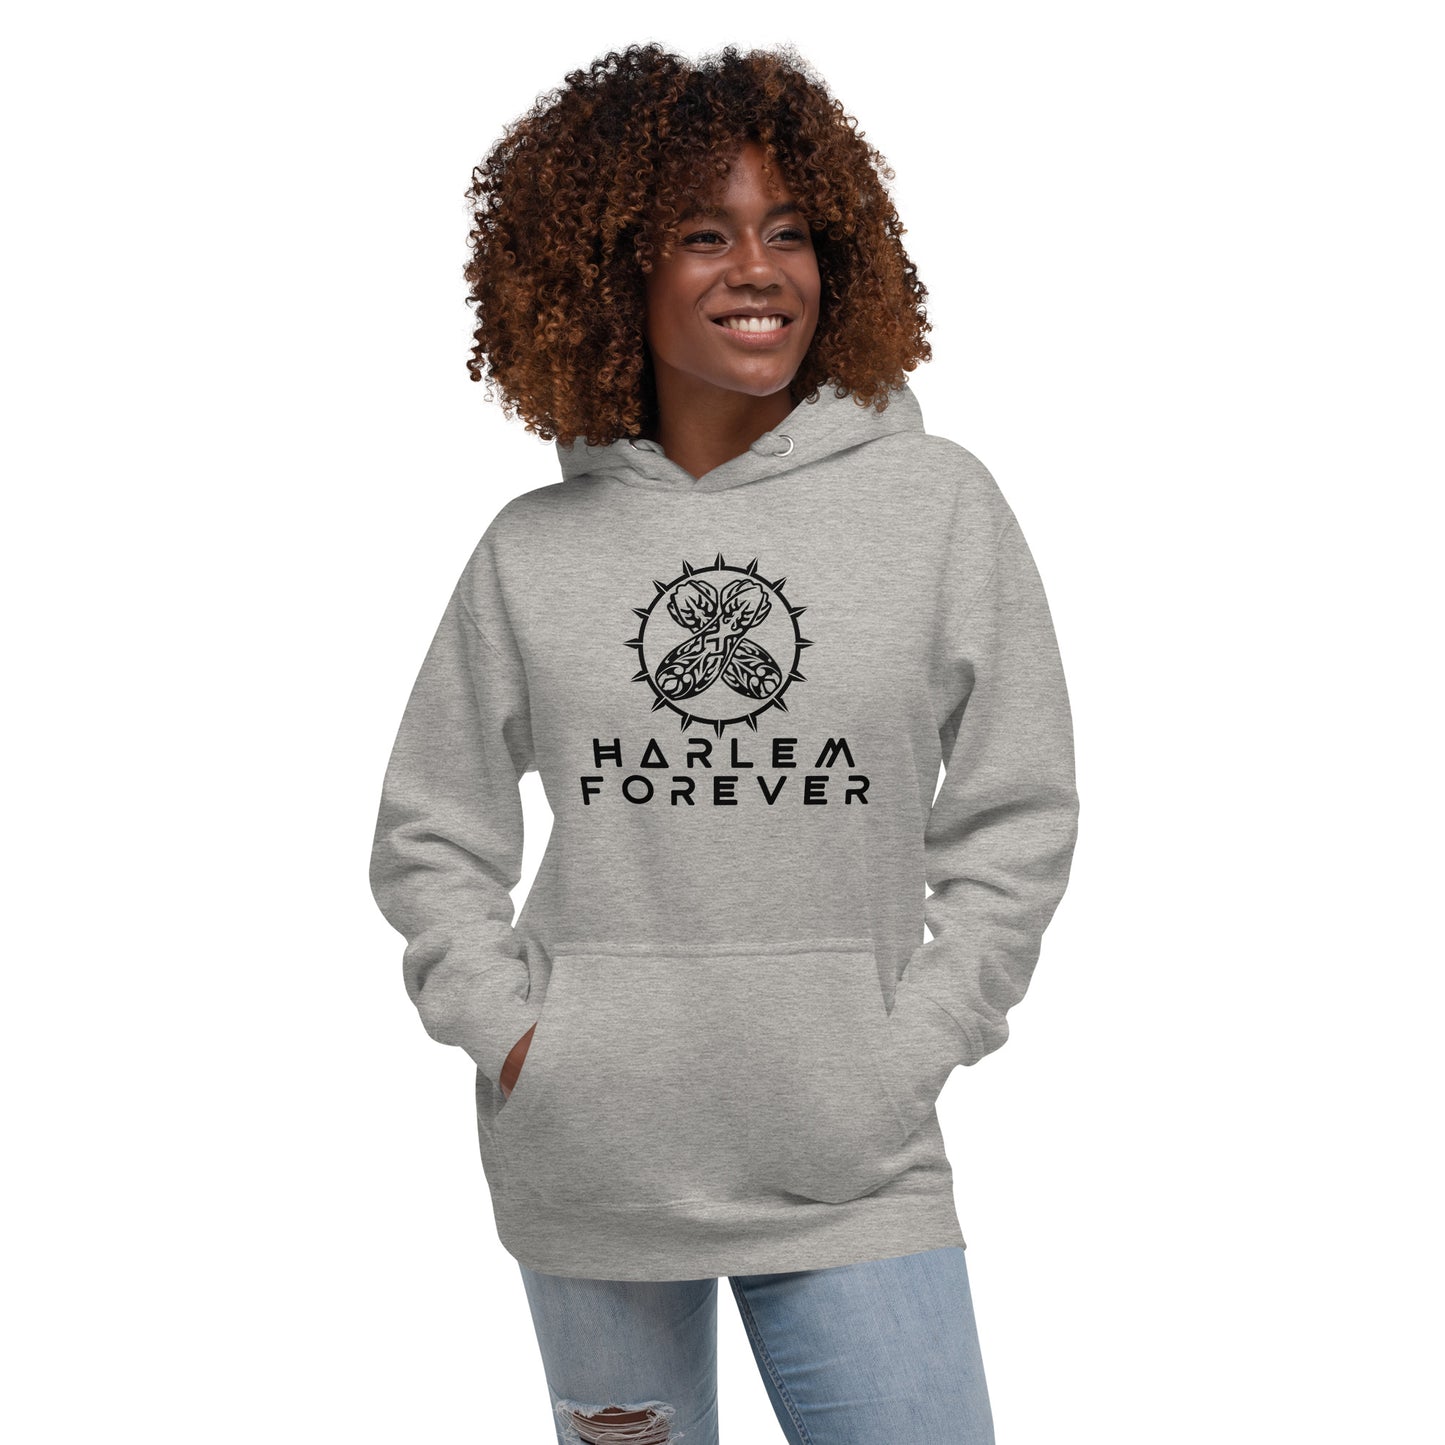 Harlem Boy Collection - Printed Harlem Forever - Hoodie - Wakanda Collection